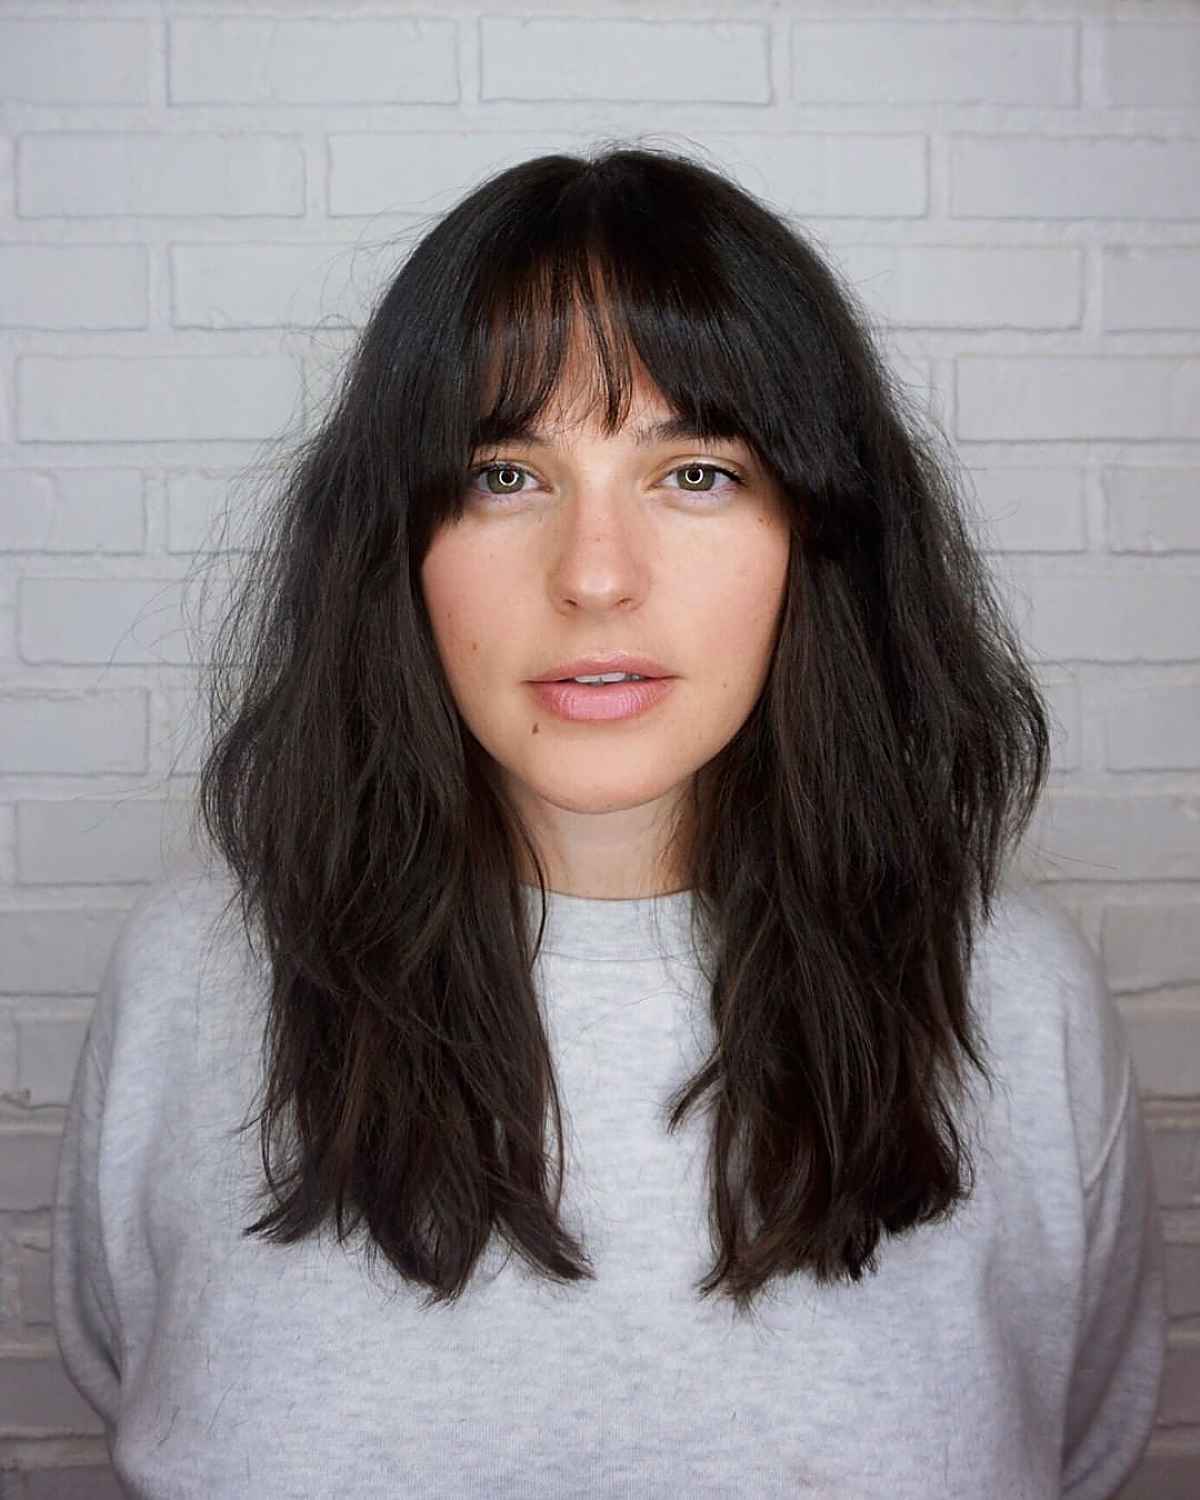 26 Flattering Ways to Wear Bangs for Women with Small Foreheads